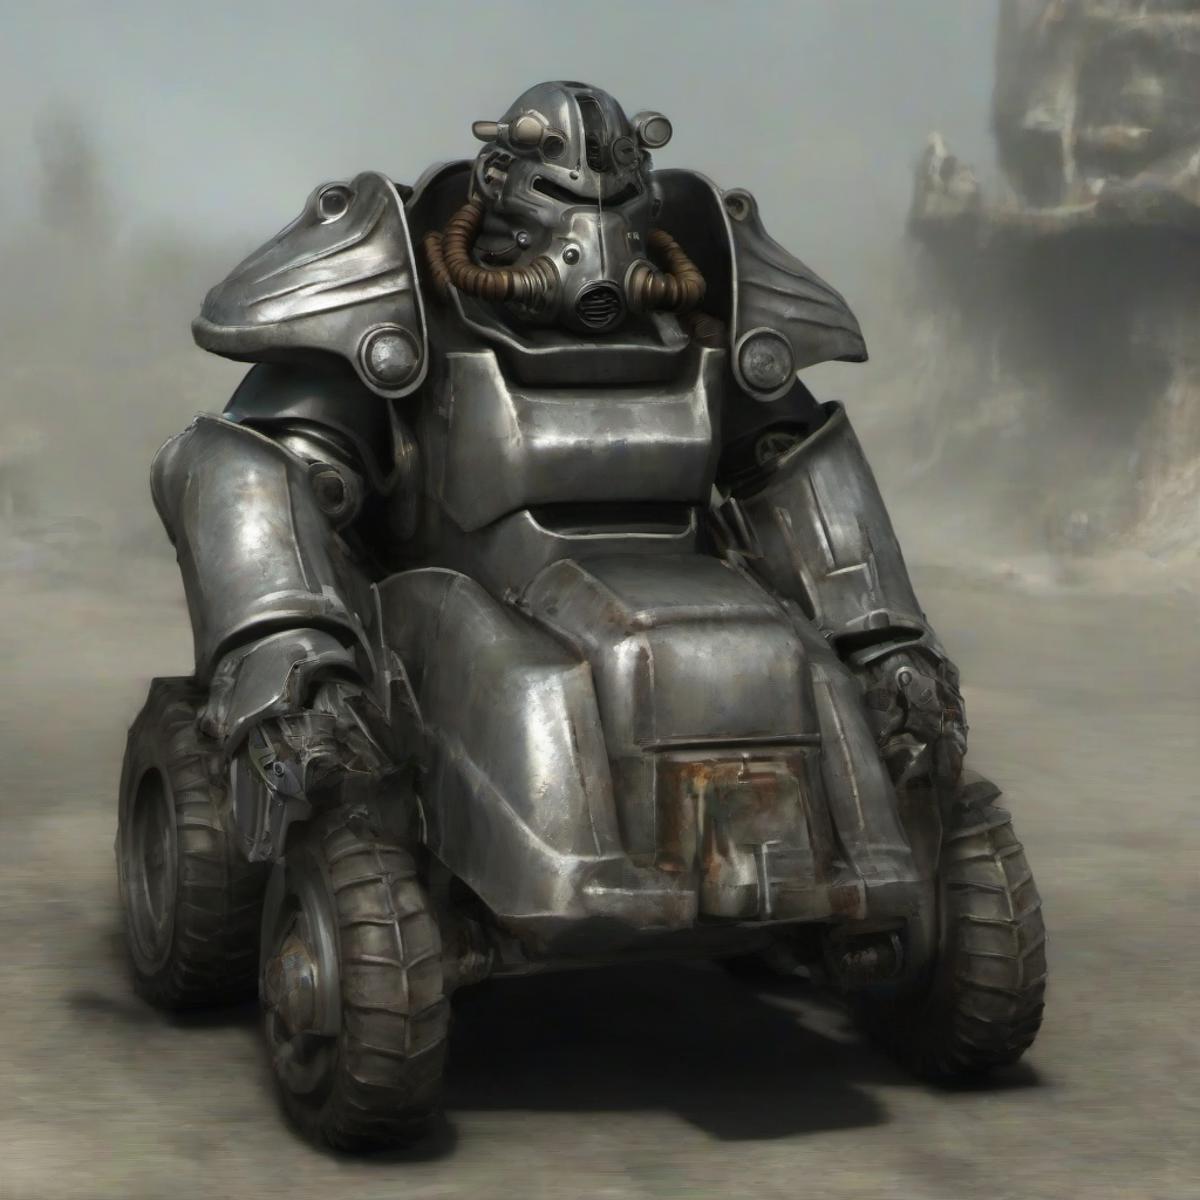 PE PowerArmor Guy [Fallout] image by Proompt_Engineer